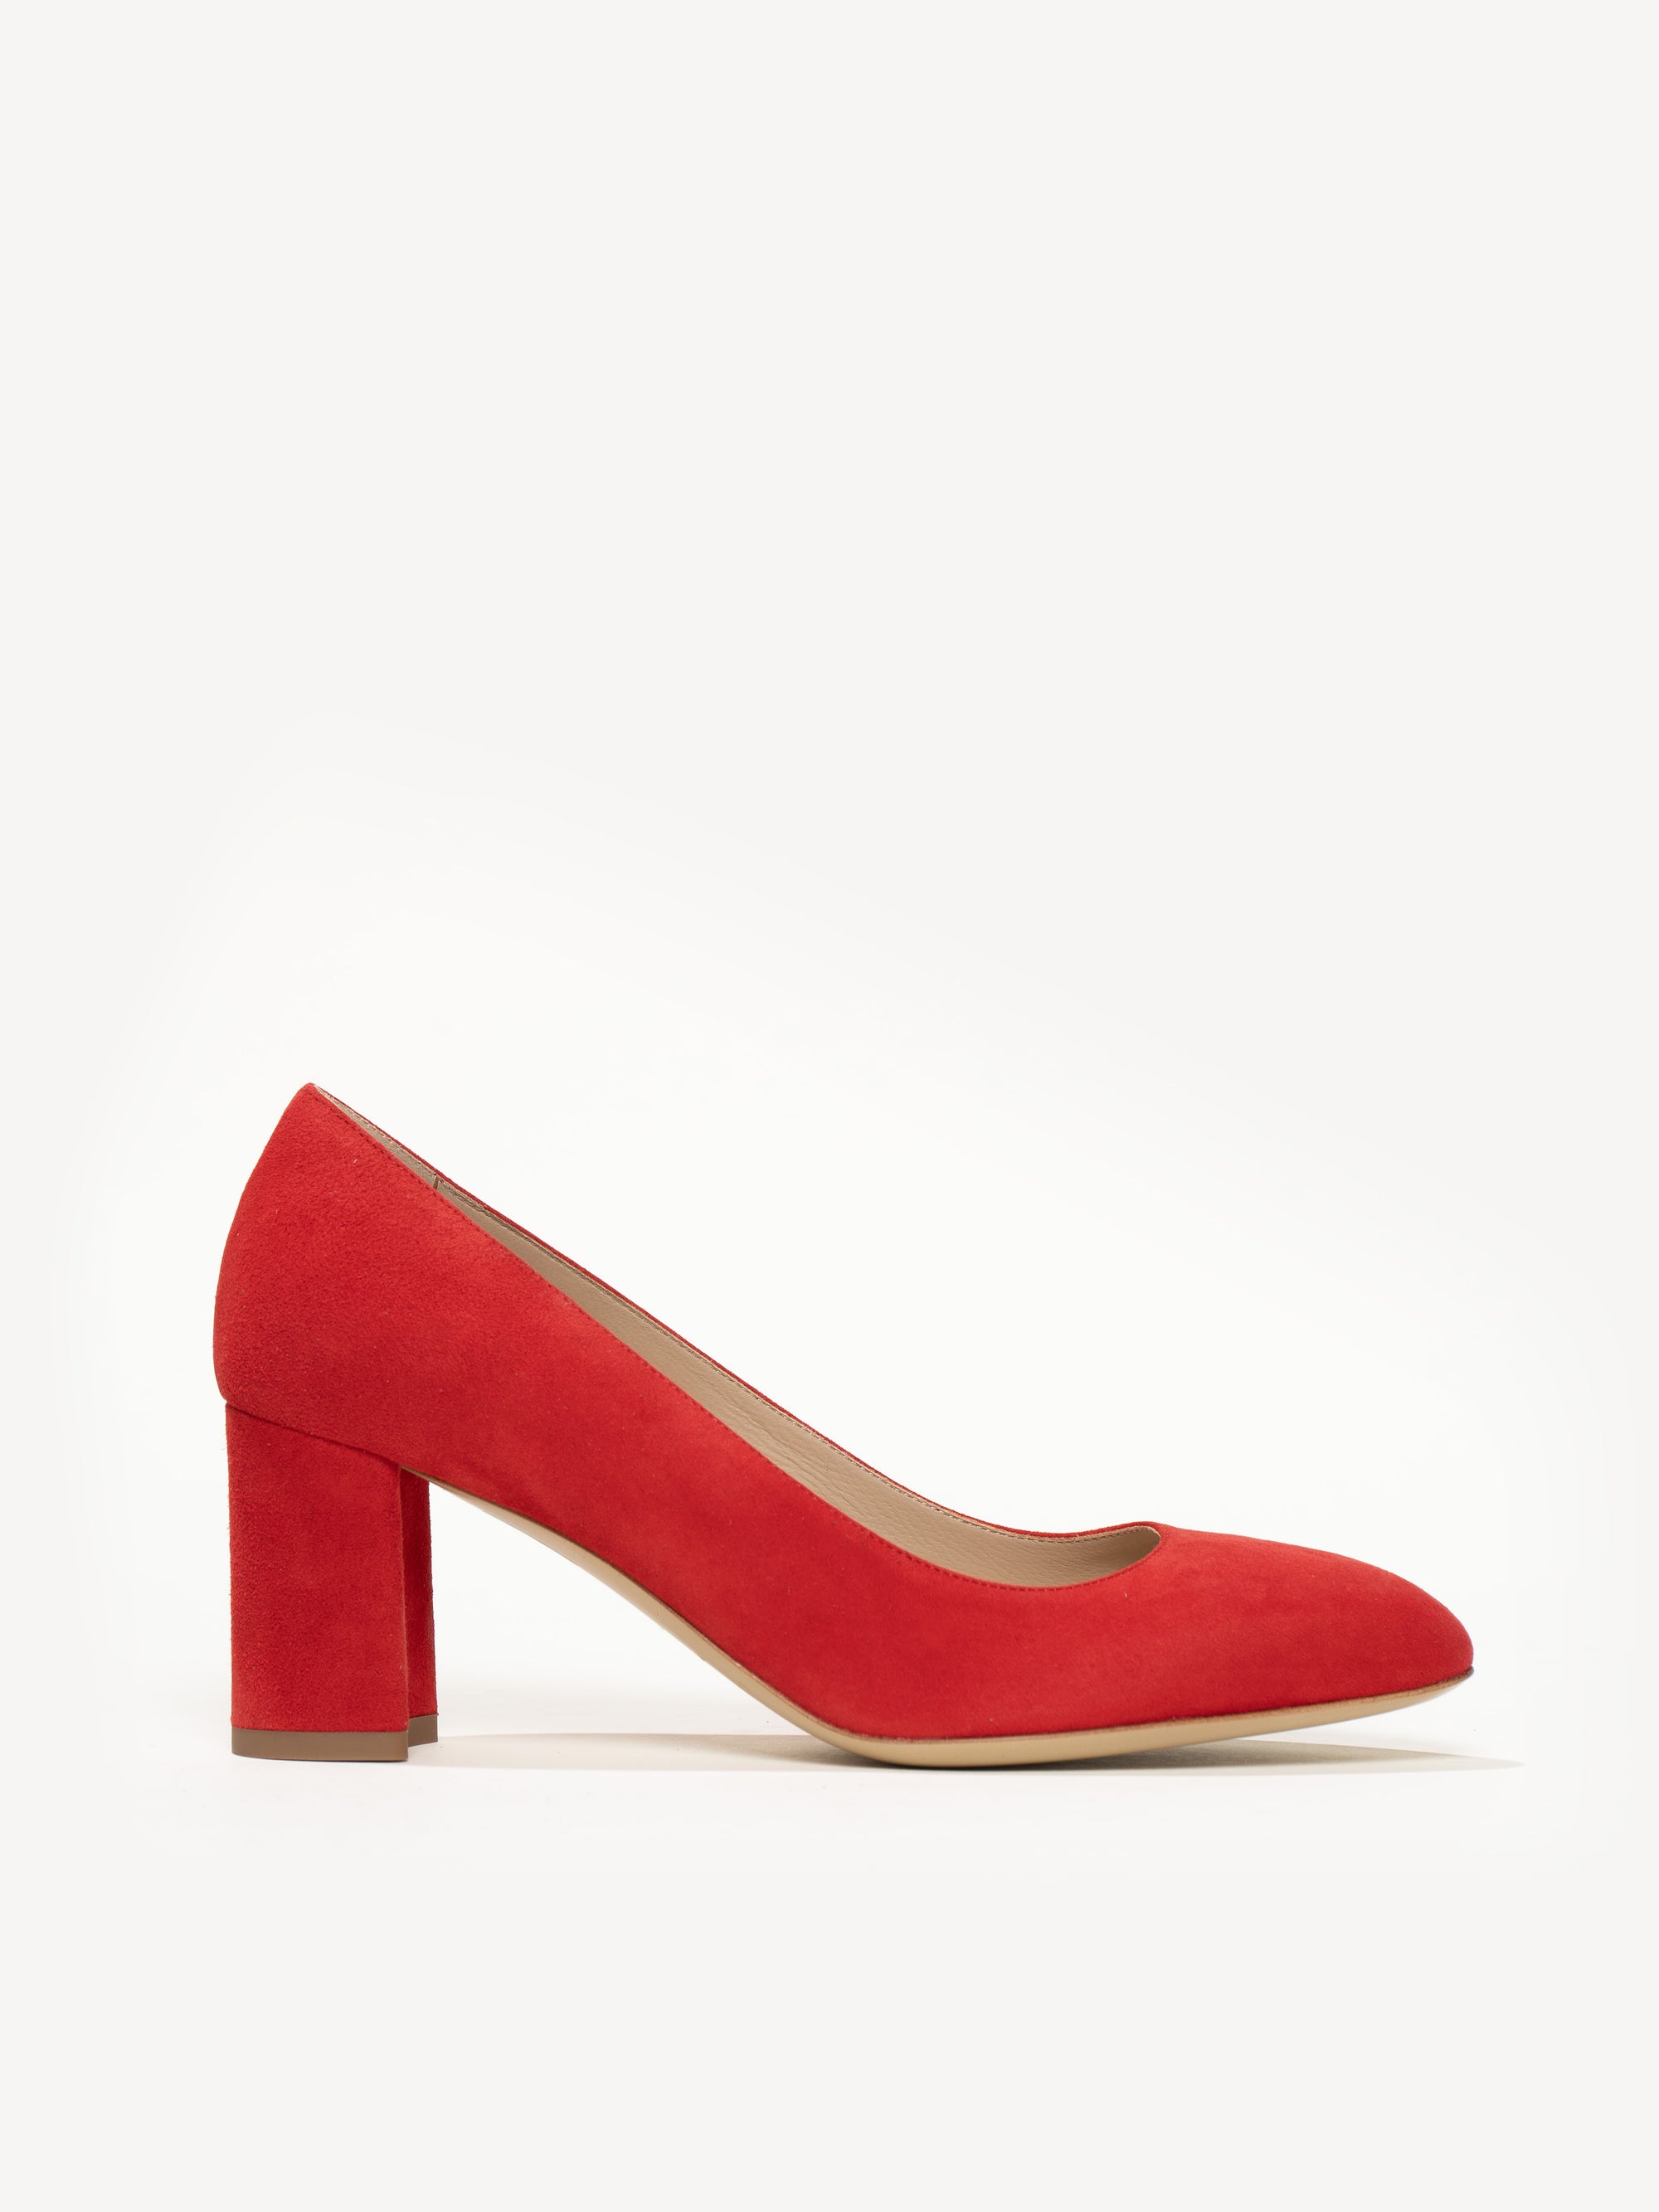 The Lustro 70mm - Sunset Red - Suede - M.Gemi